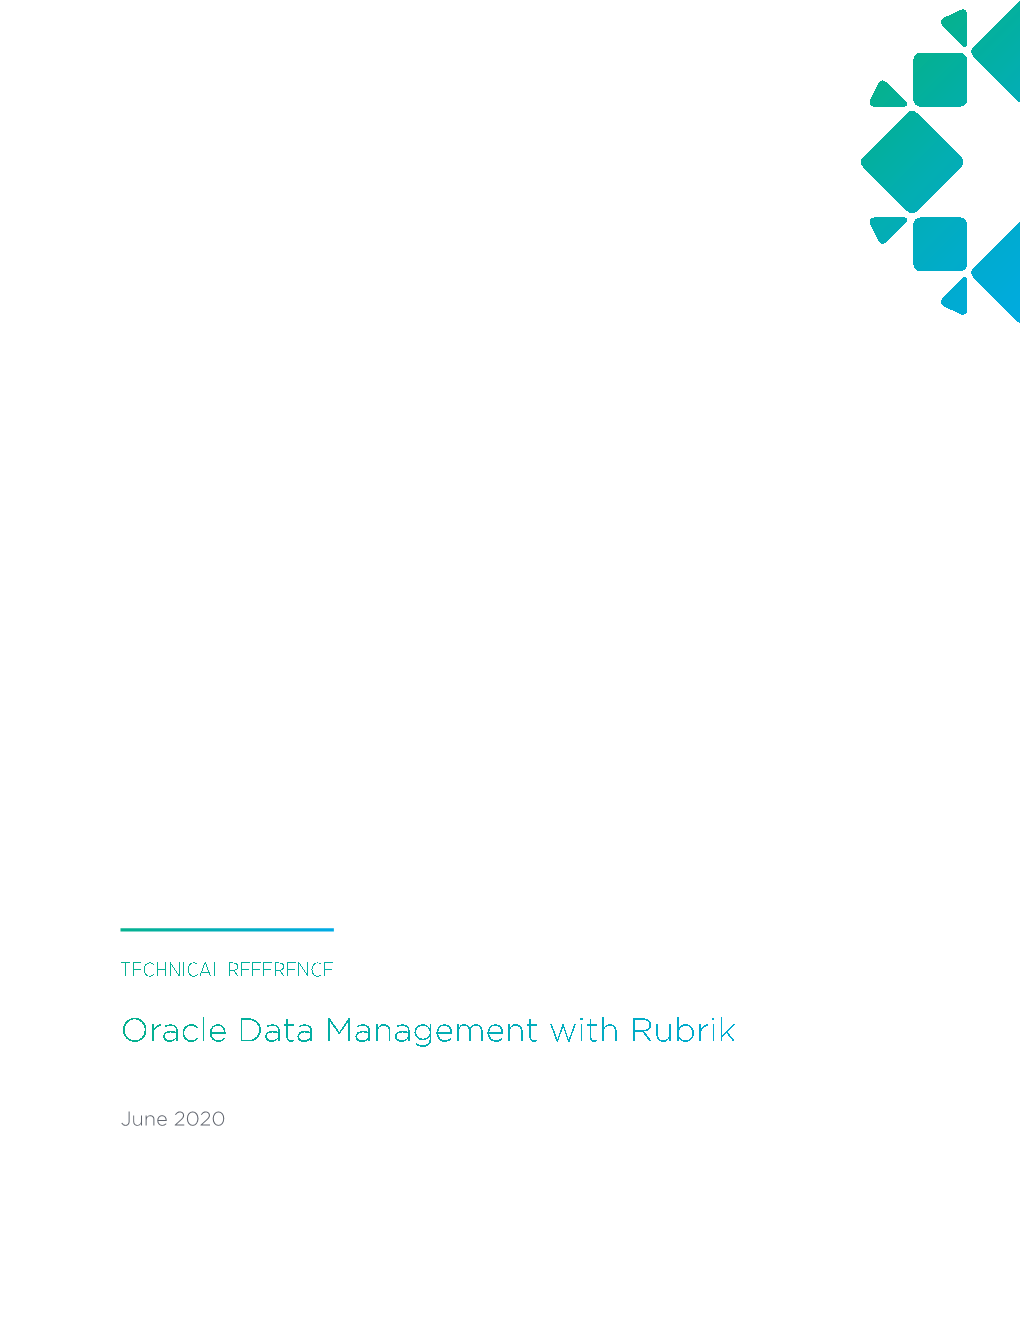 Oracle Data Management with Rubrik